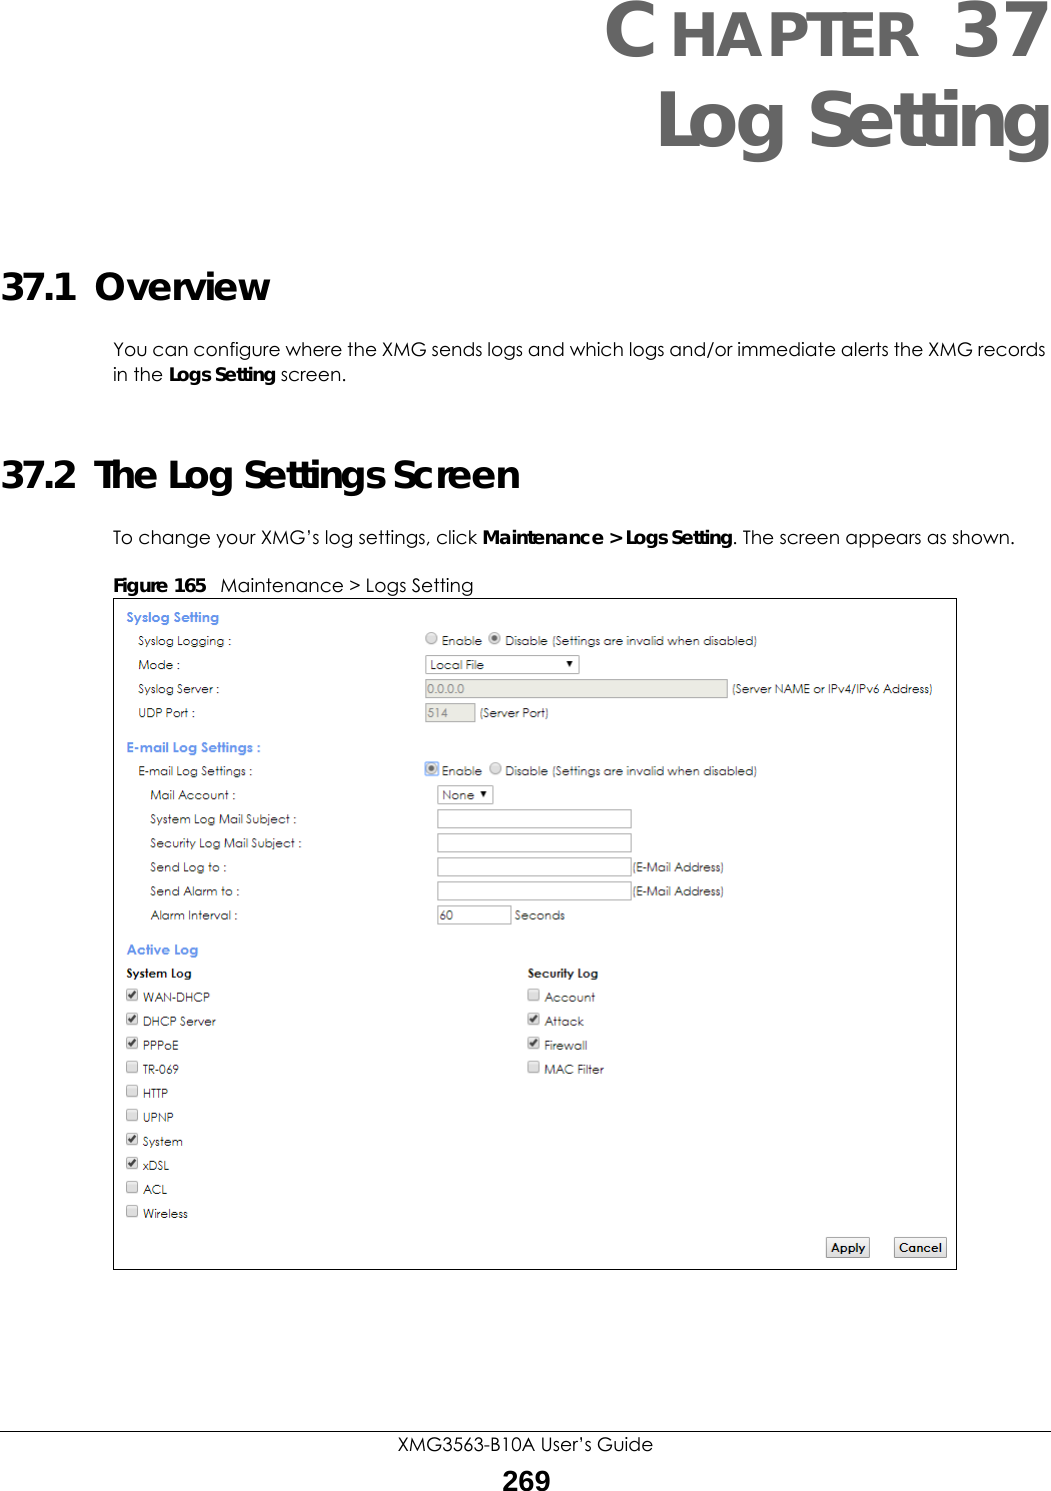 XMG3563-B10A User’s Guide269CHAPTER 37Log Setting37.1  Overview You can configure where the XMG sends logs and which logs and/or immediate alerts the XMG records in the Logs Setting screen.37.2  The Log Settings ScreenTo change your XMG’s log settings, click Maintenance &gt; Logs Setting. The screen appears as shown.Figure 165   Maintenance &gt; Logs Setting